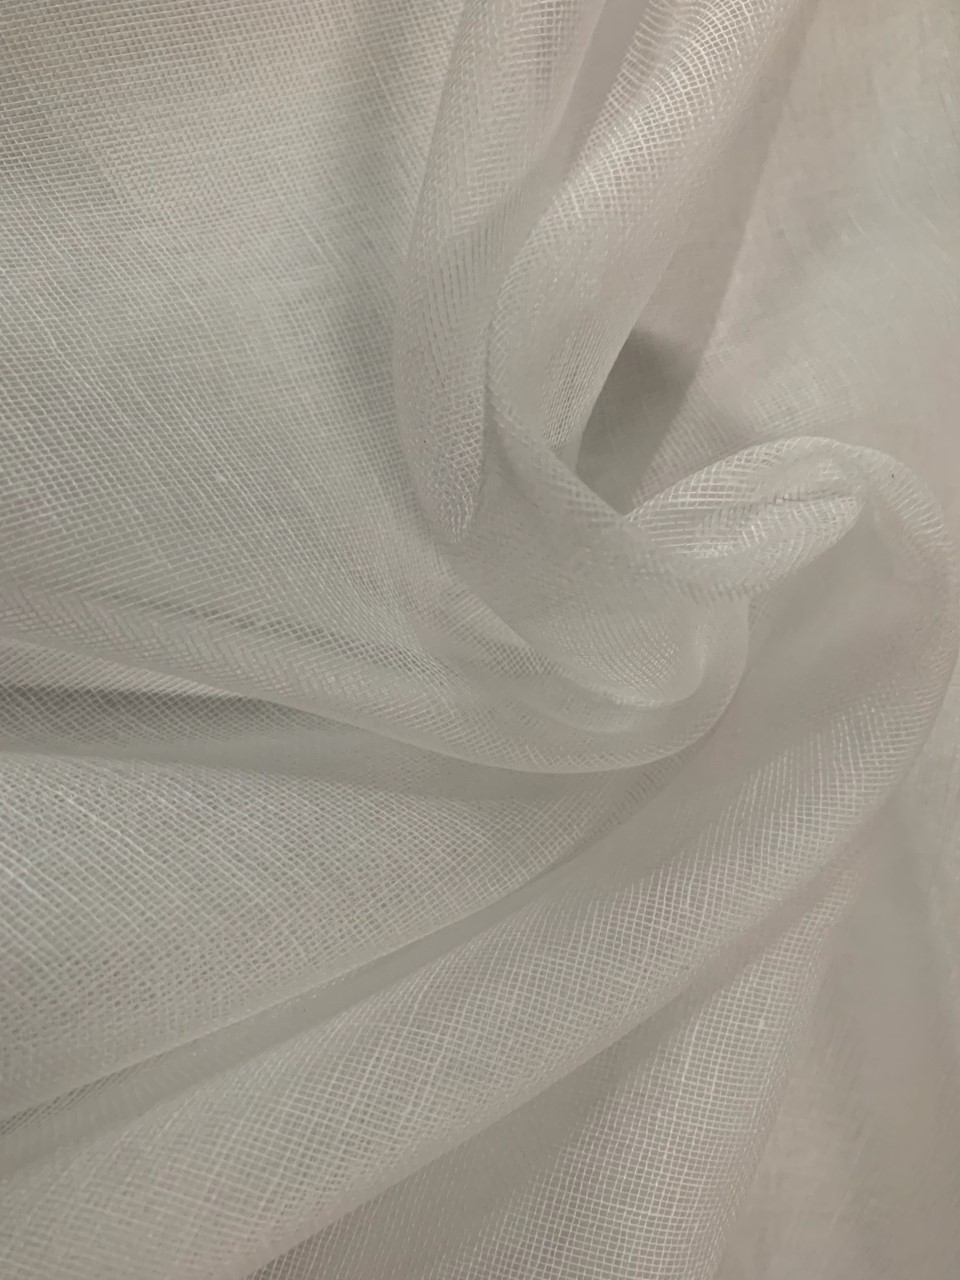 Grade 60 White Cheesecloth Roll - 100 Yards 36" Wide